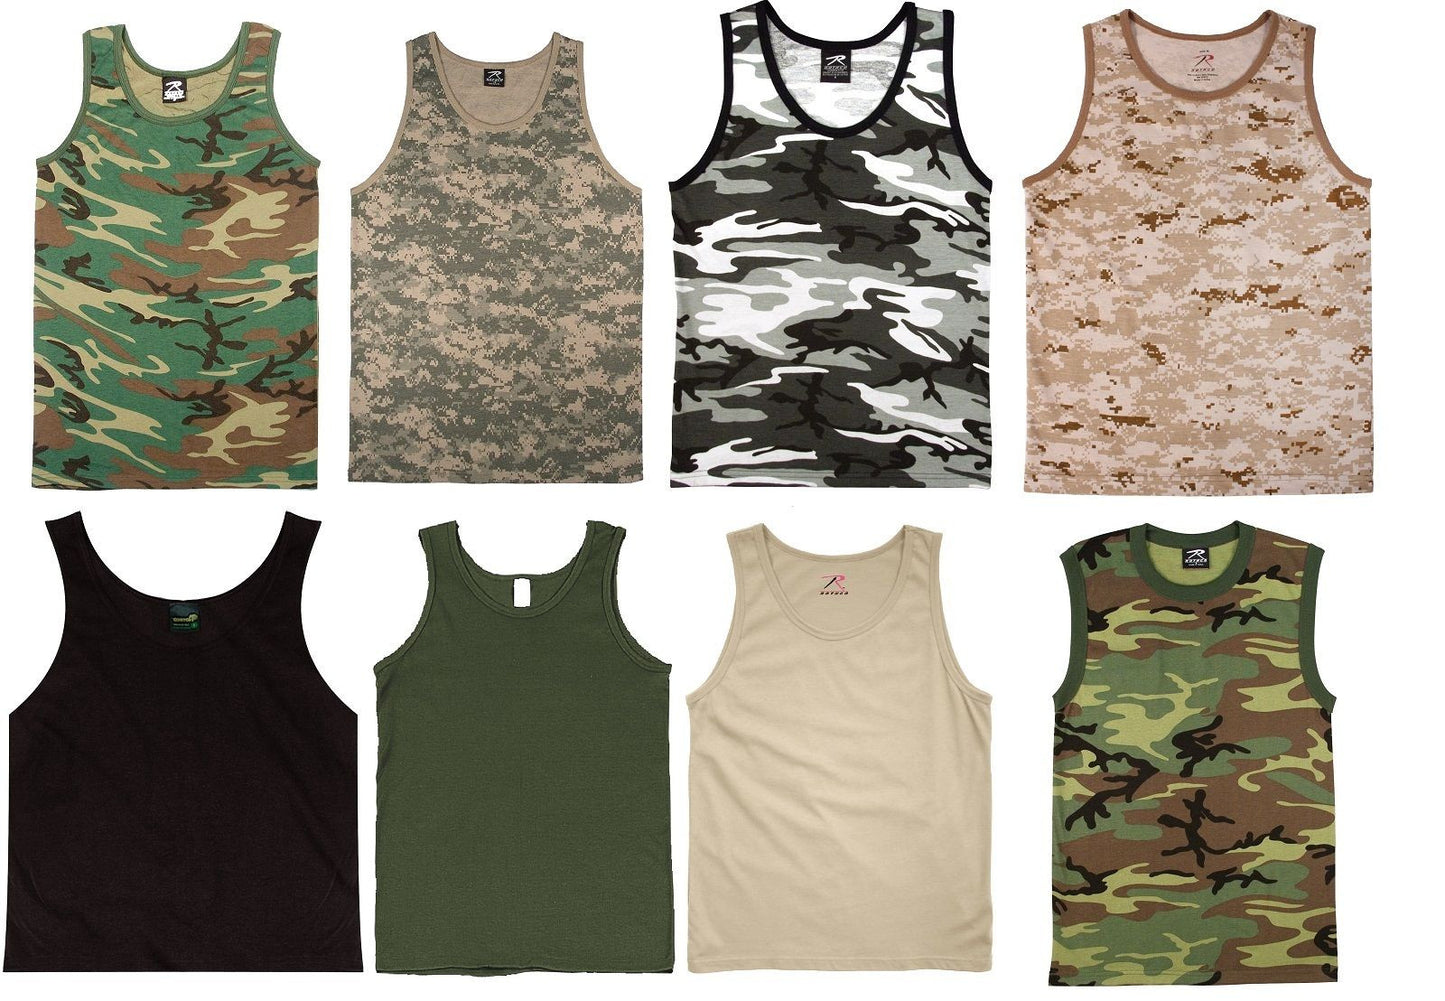 Camo and Colored Tank Tops Shirts Sleeveless Muscle Tanktop